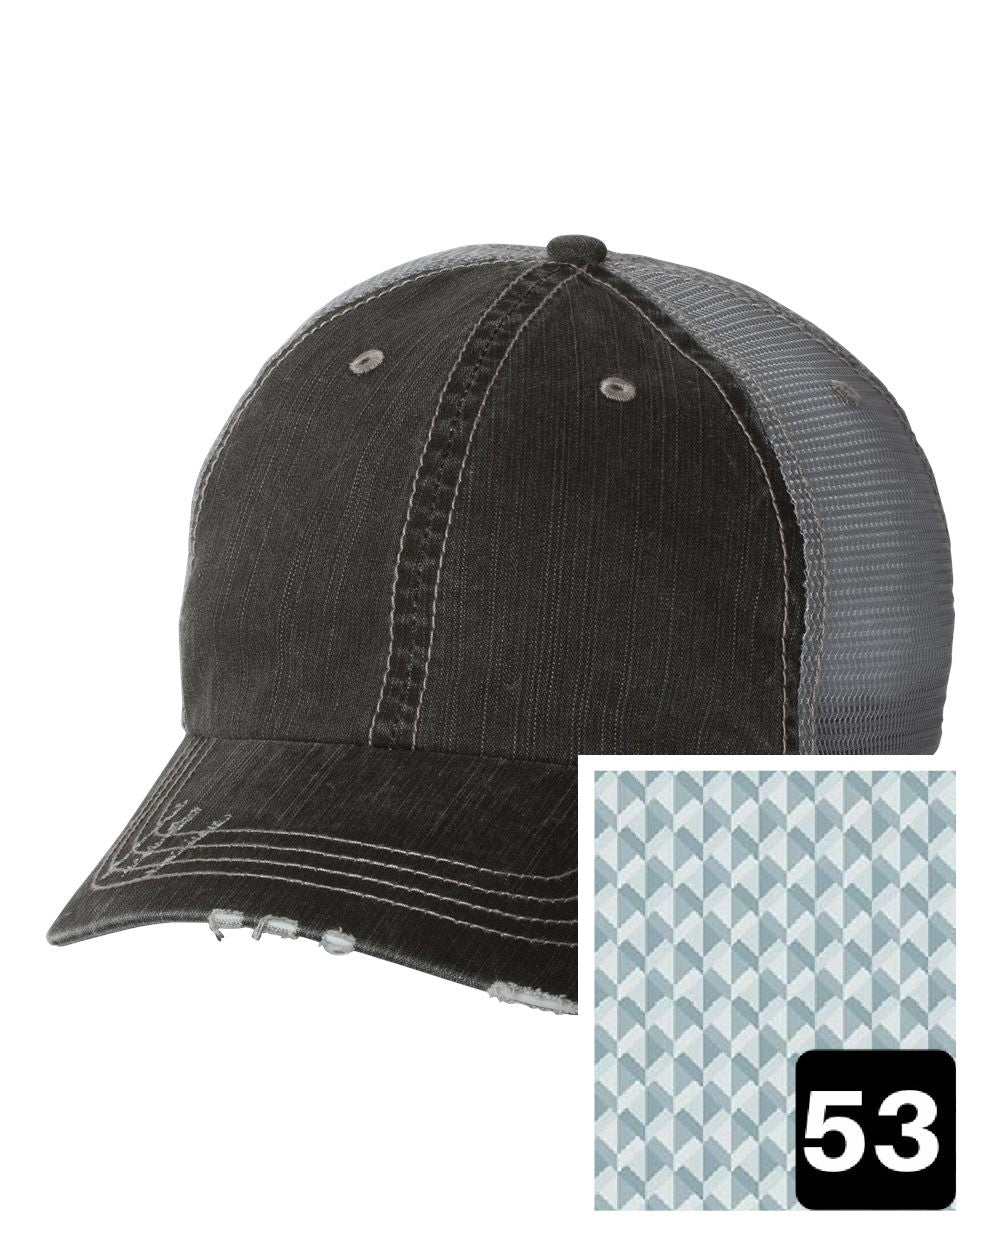 gray distressed trucker hat with multi-color stripe fabric state of Missouri